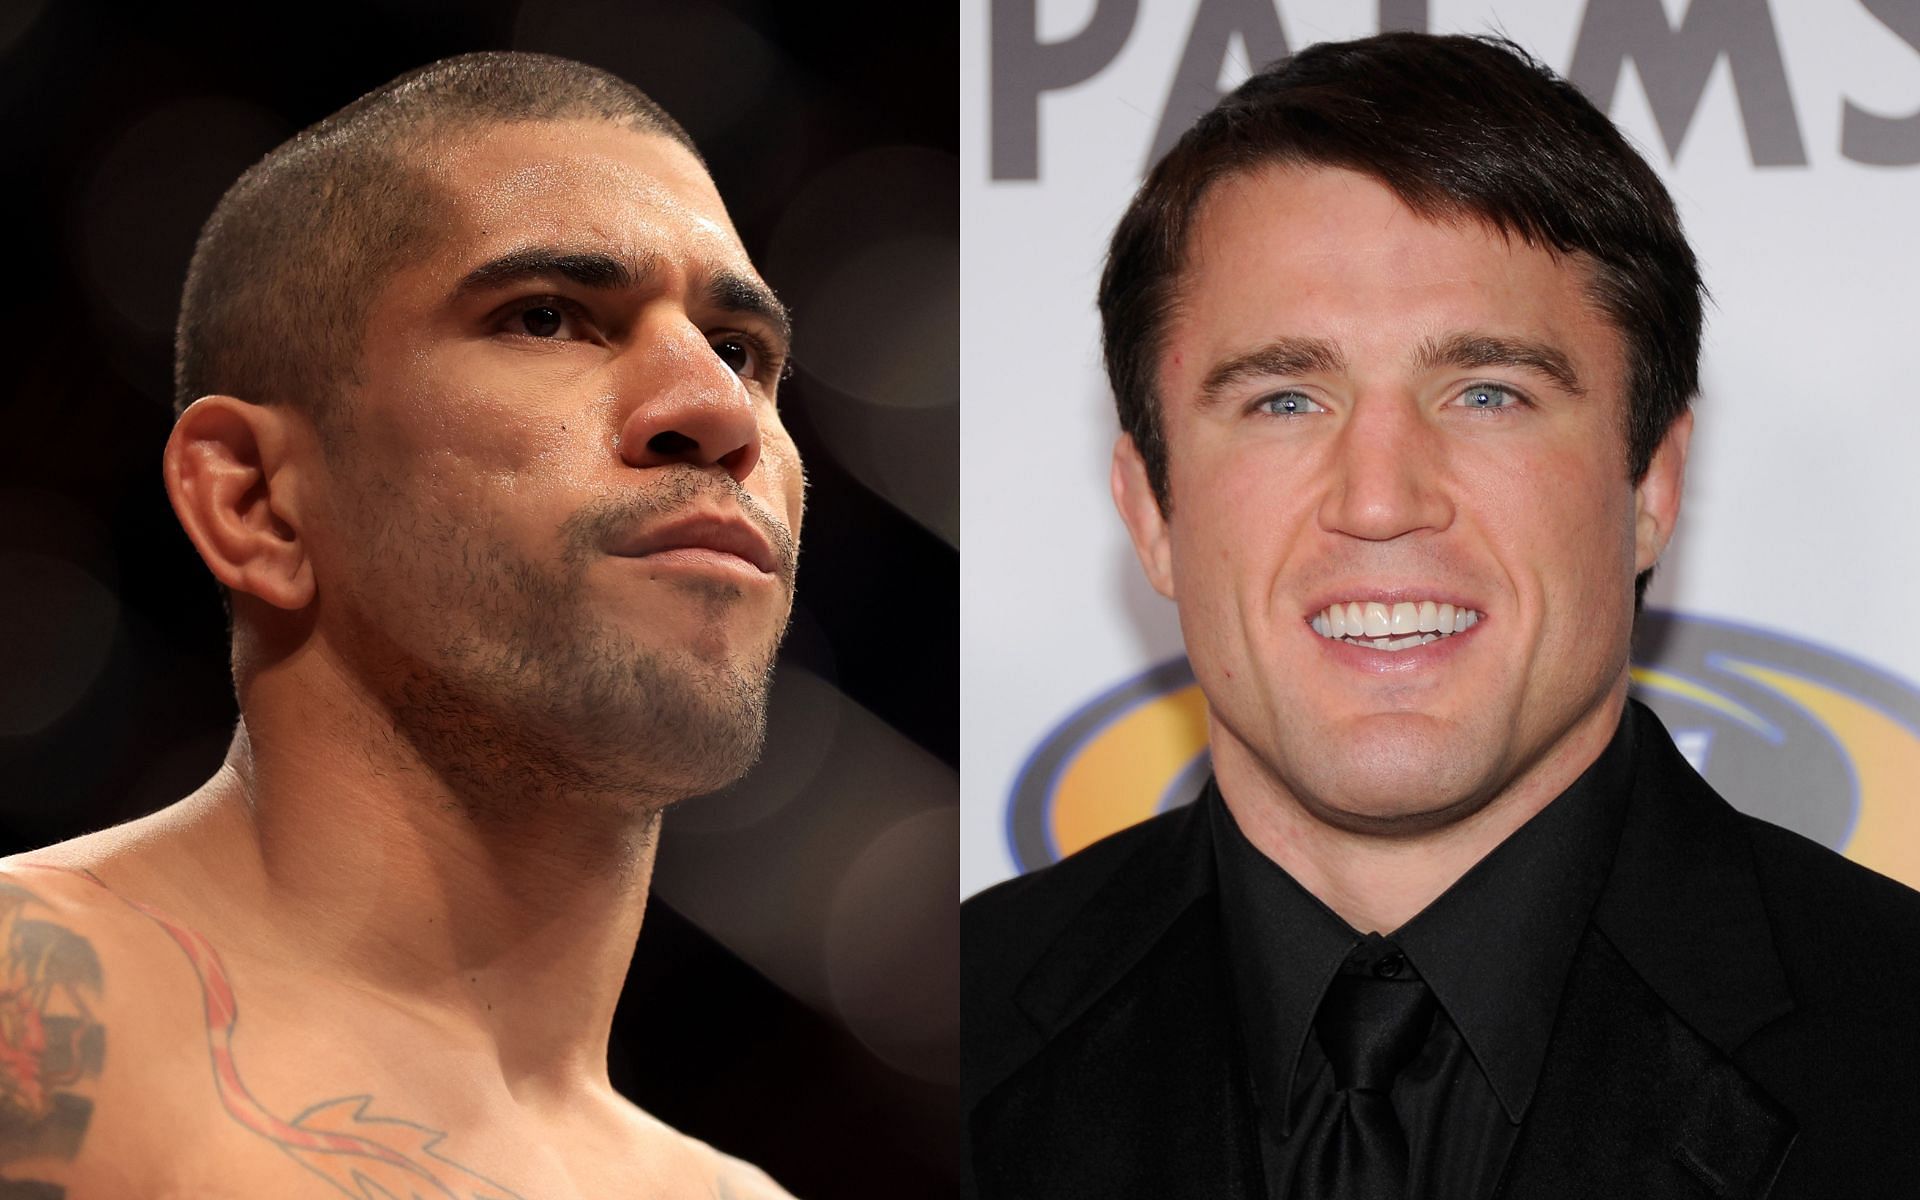 Alex Pereira (Left) and Chael Sonnen (Right)